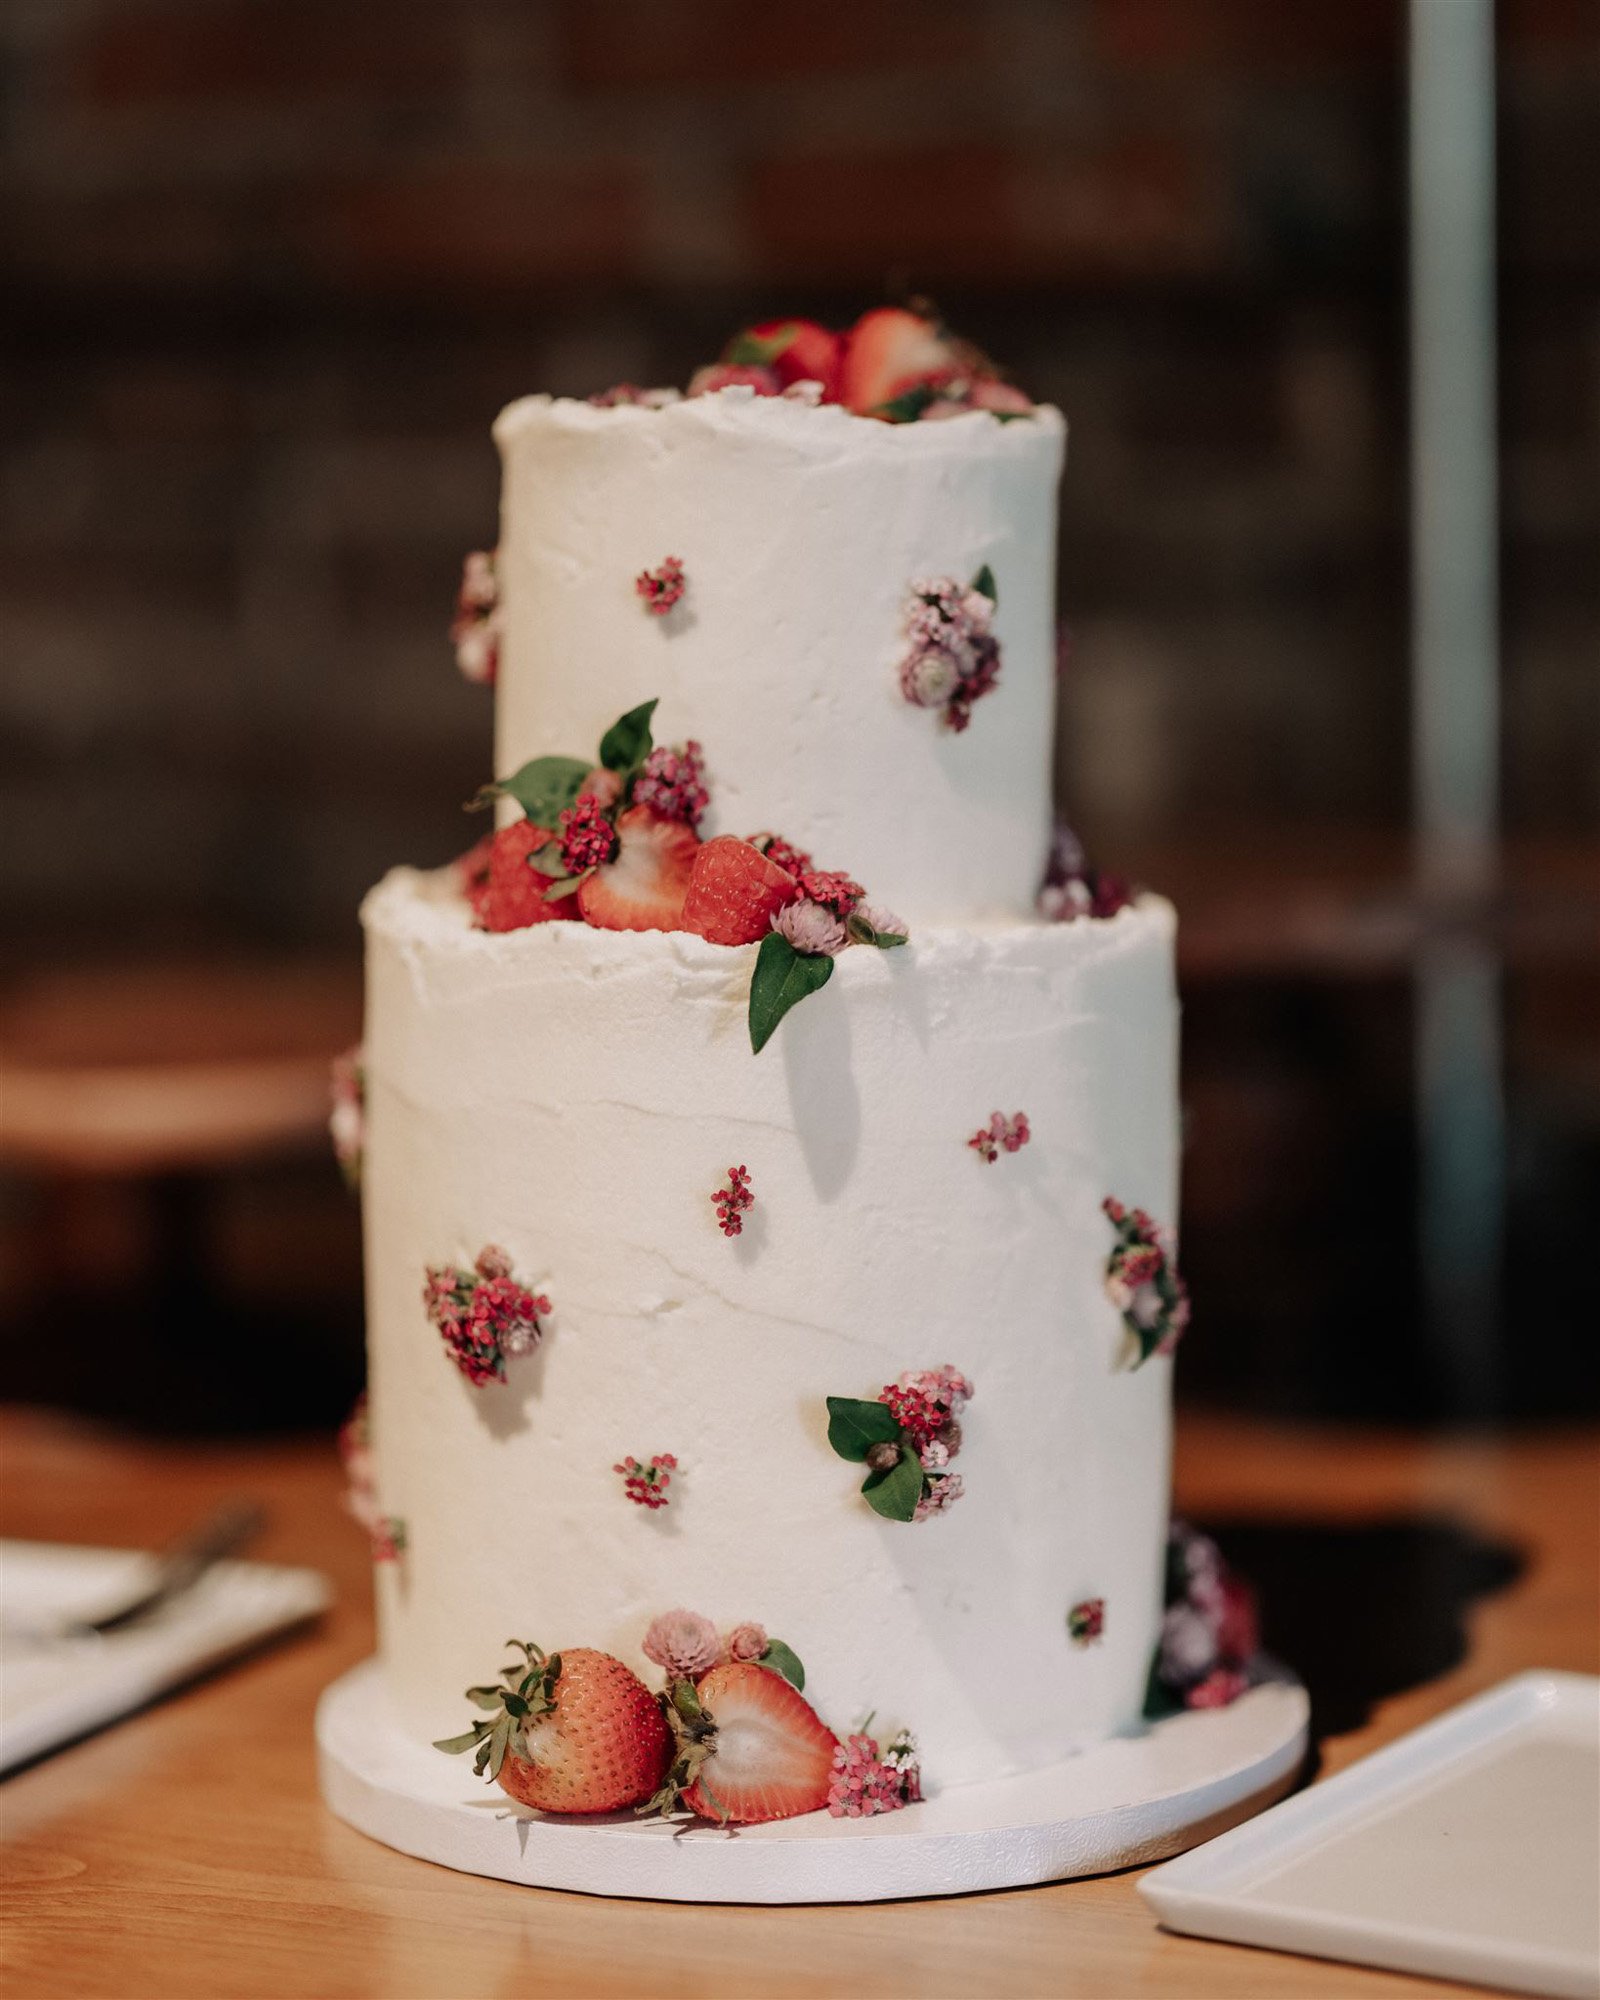 a unique strawberry wedding cake at this artful wedding in st. paul minnesota.